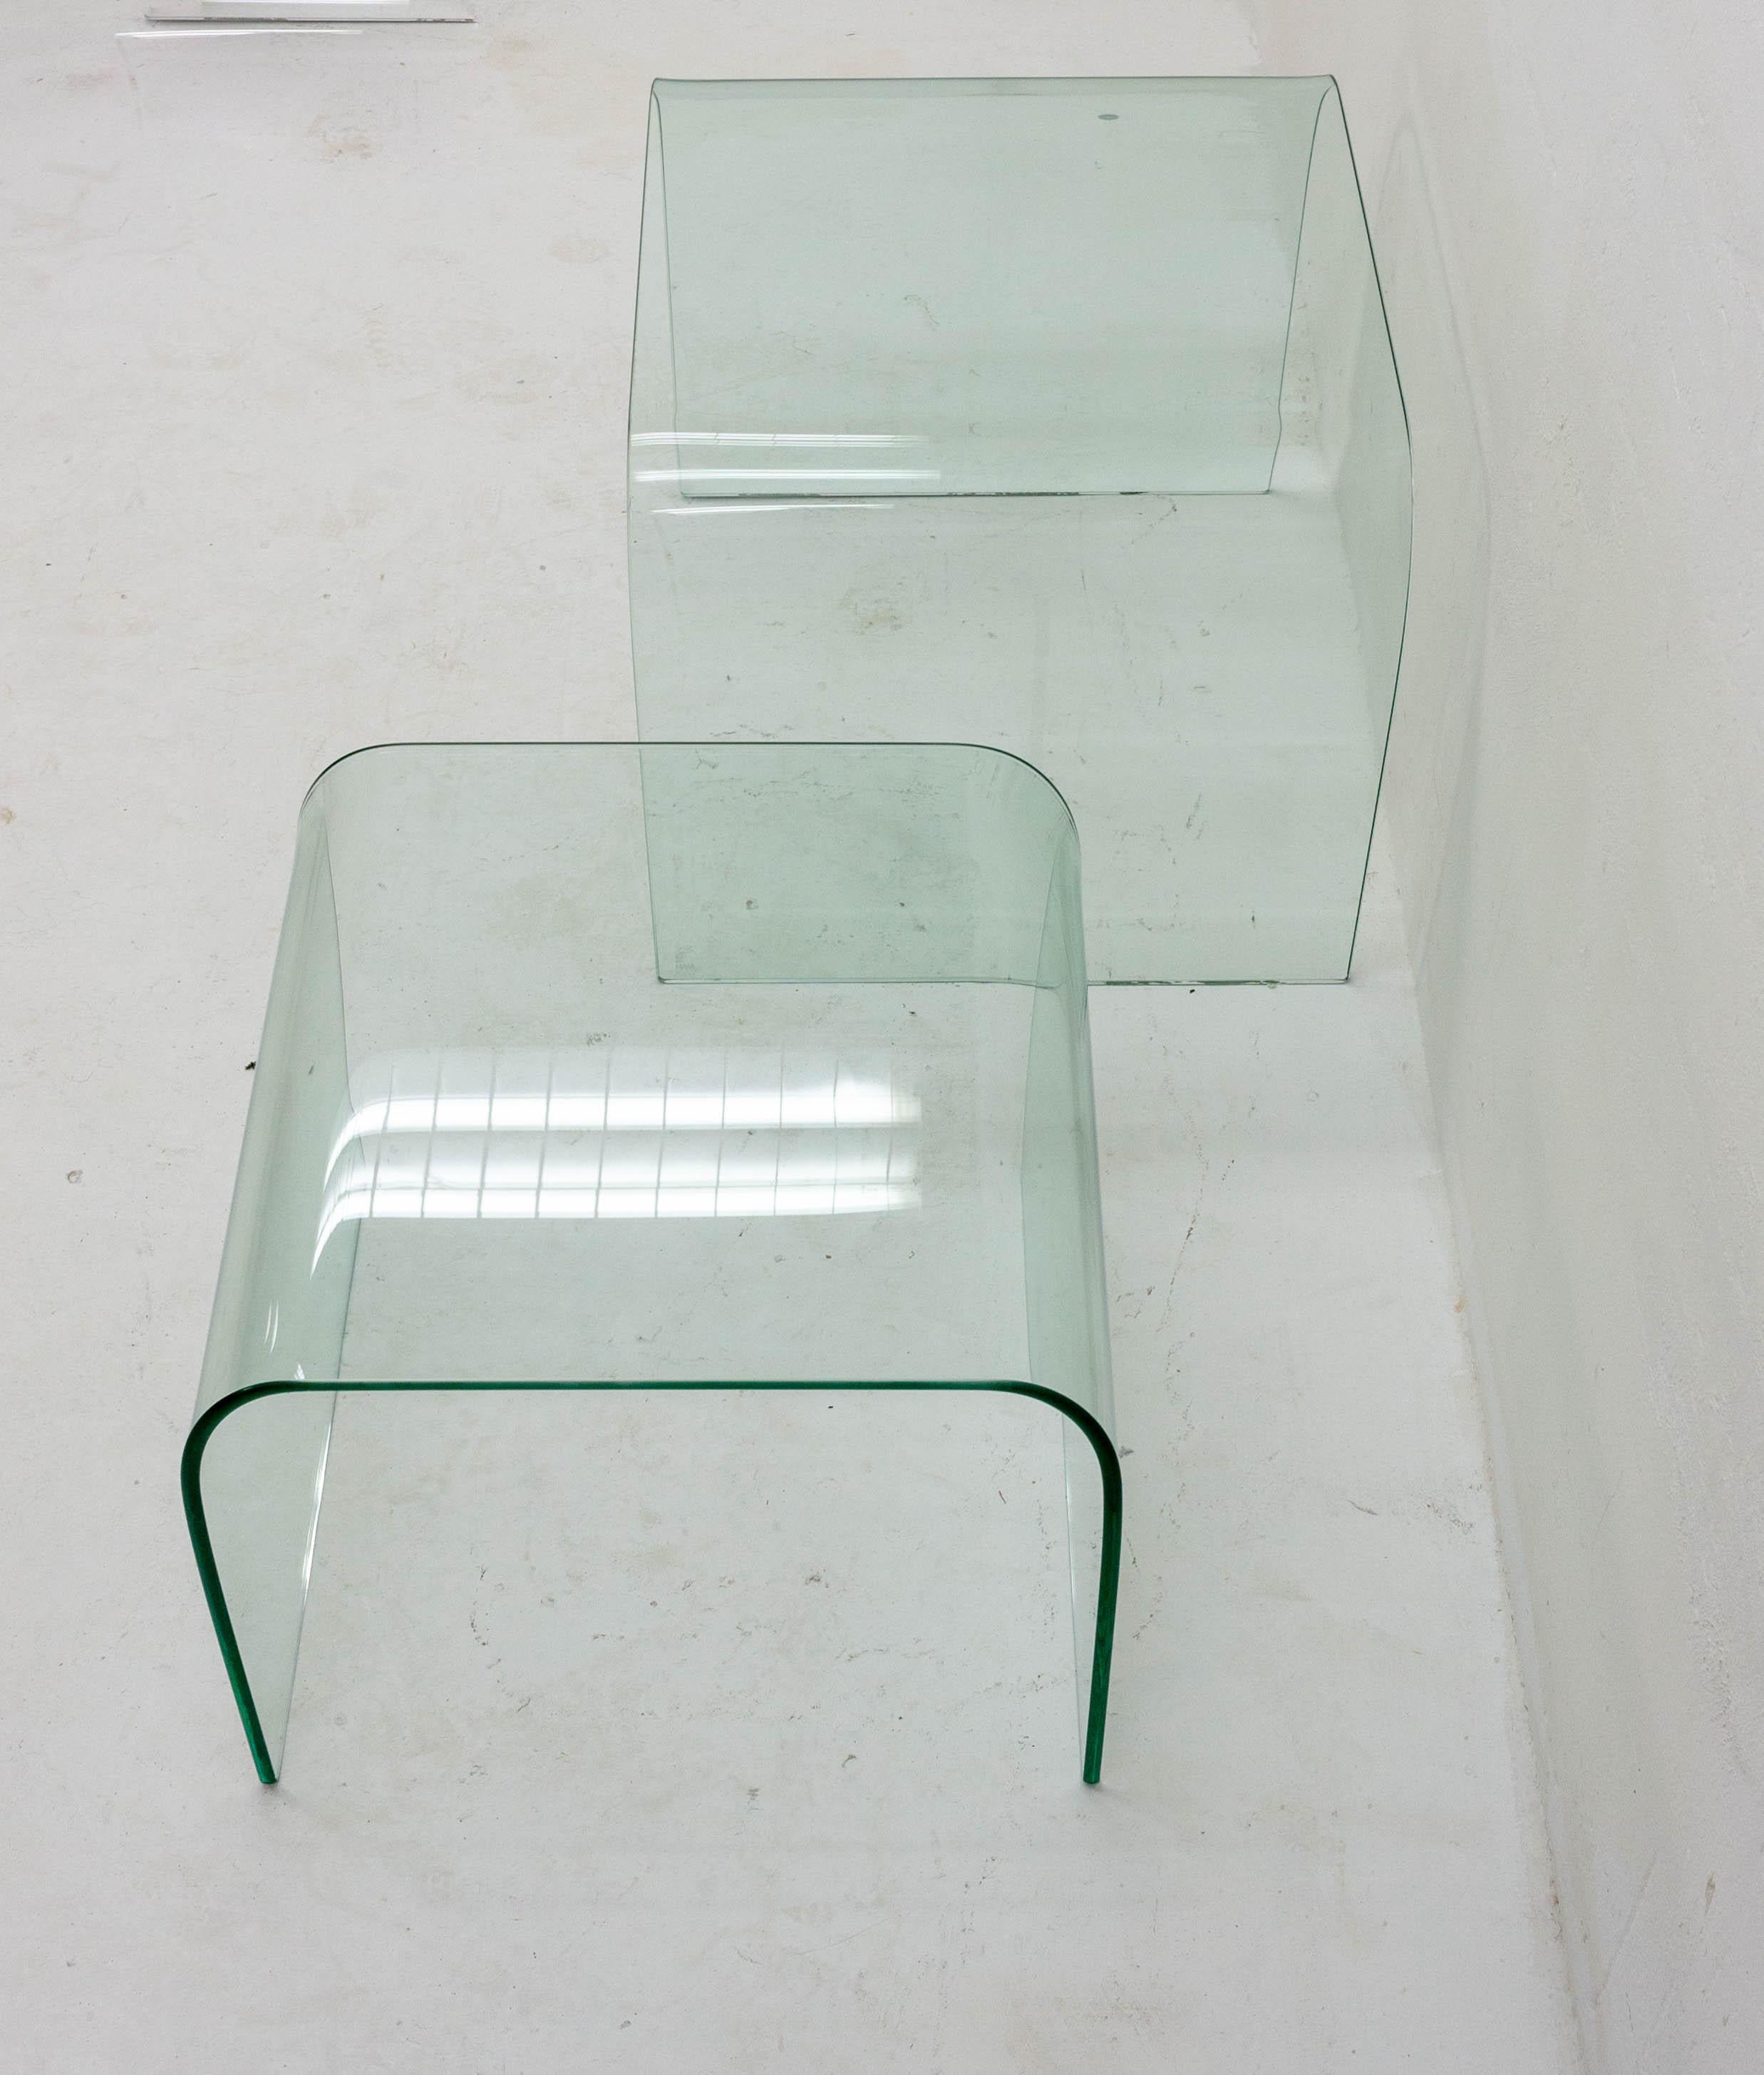 Two FIAM Rialto Italy design side tables. Nice and simple design executed with great quality in thick glass.